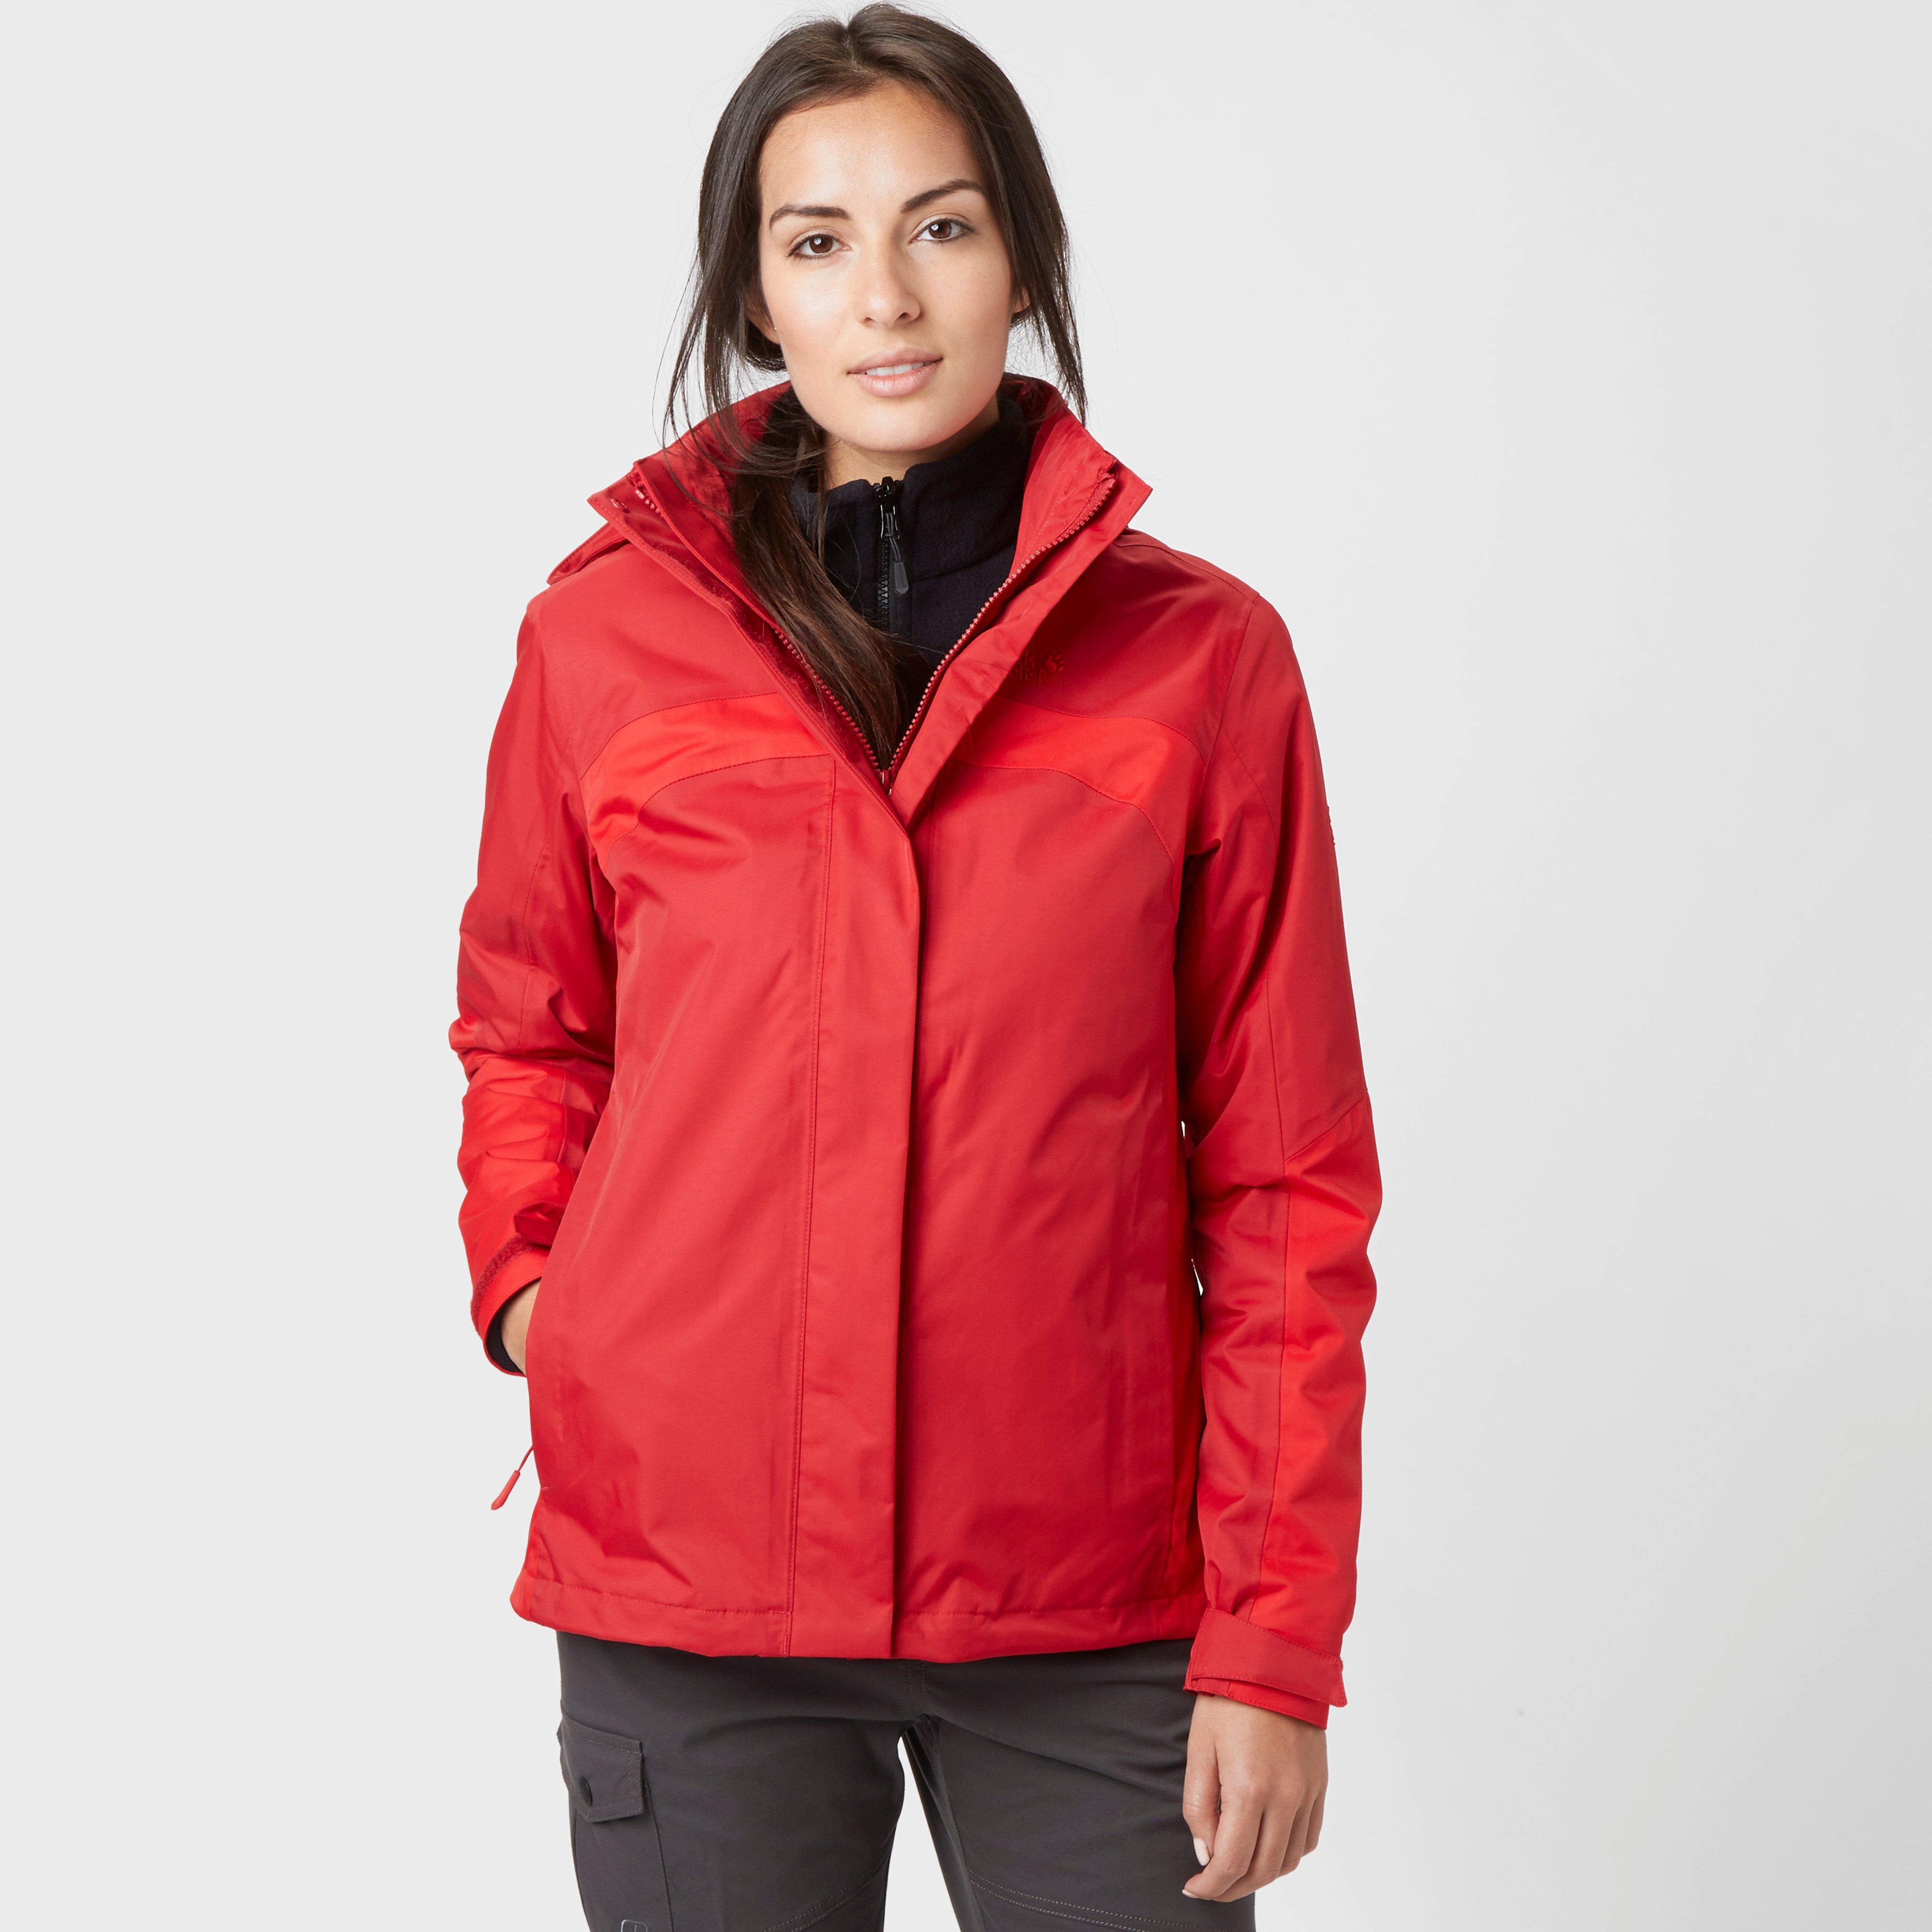 Jack Wolfskin Risco 3 in 1 Jacket – Women’s | Jacket Compare – Compare ...